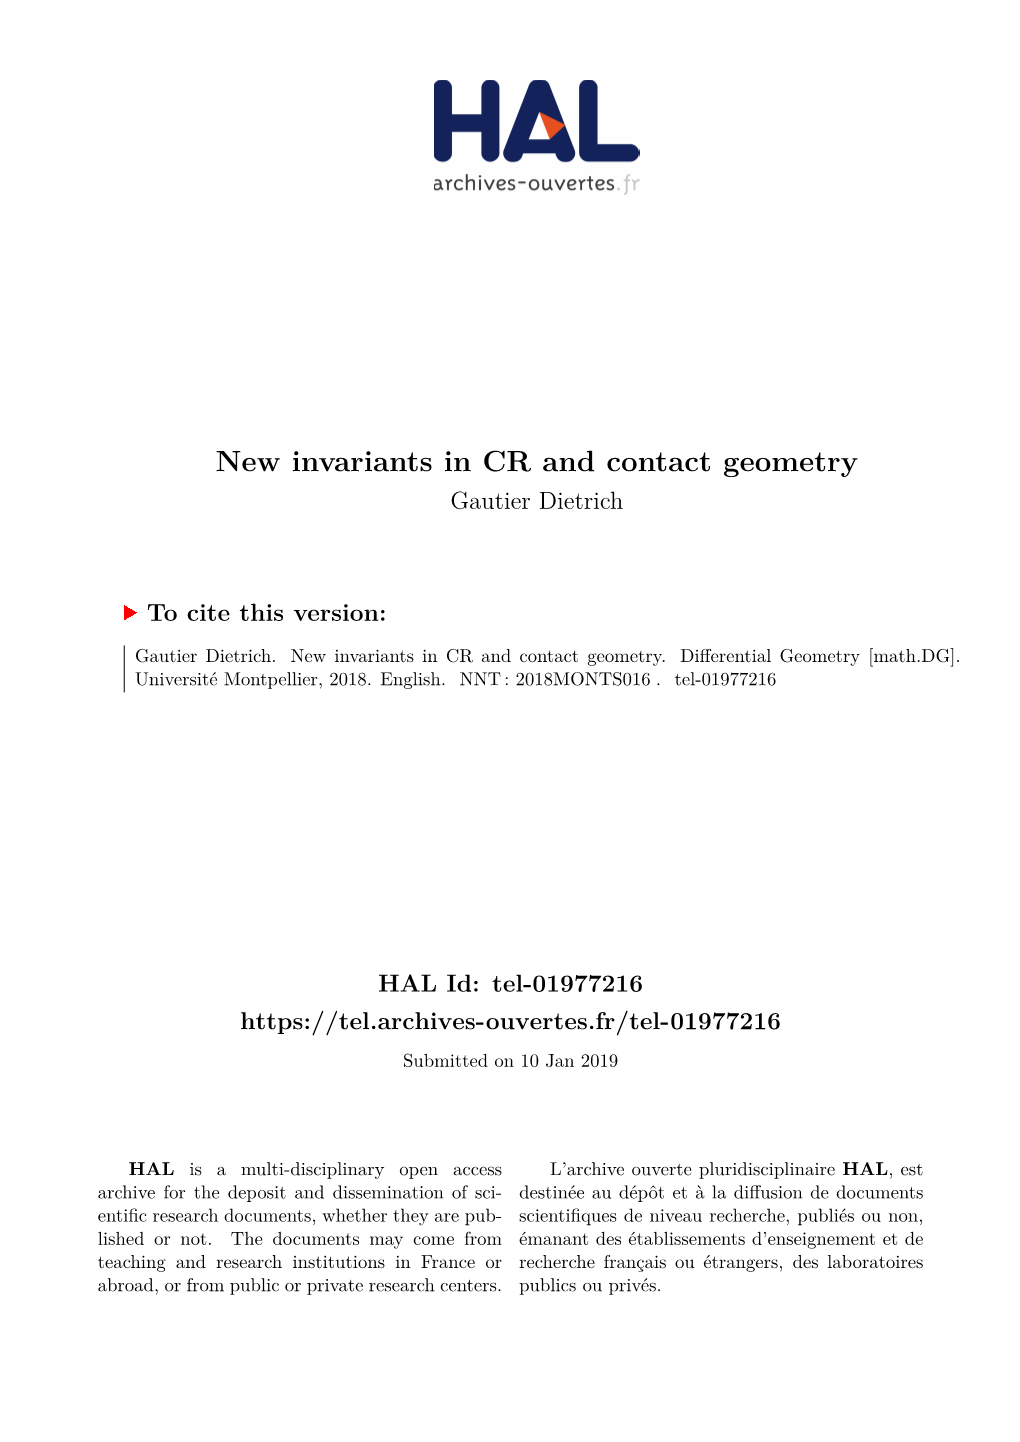 New Invariants in CR and Contact Geometry Gautier Dietrich